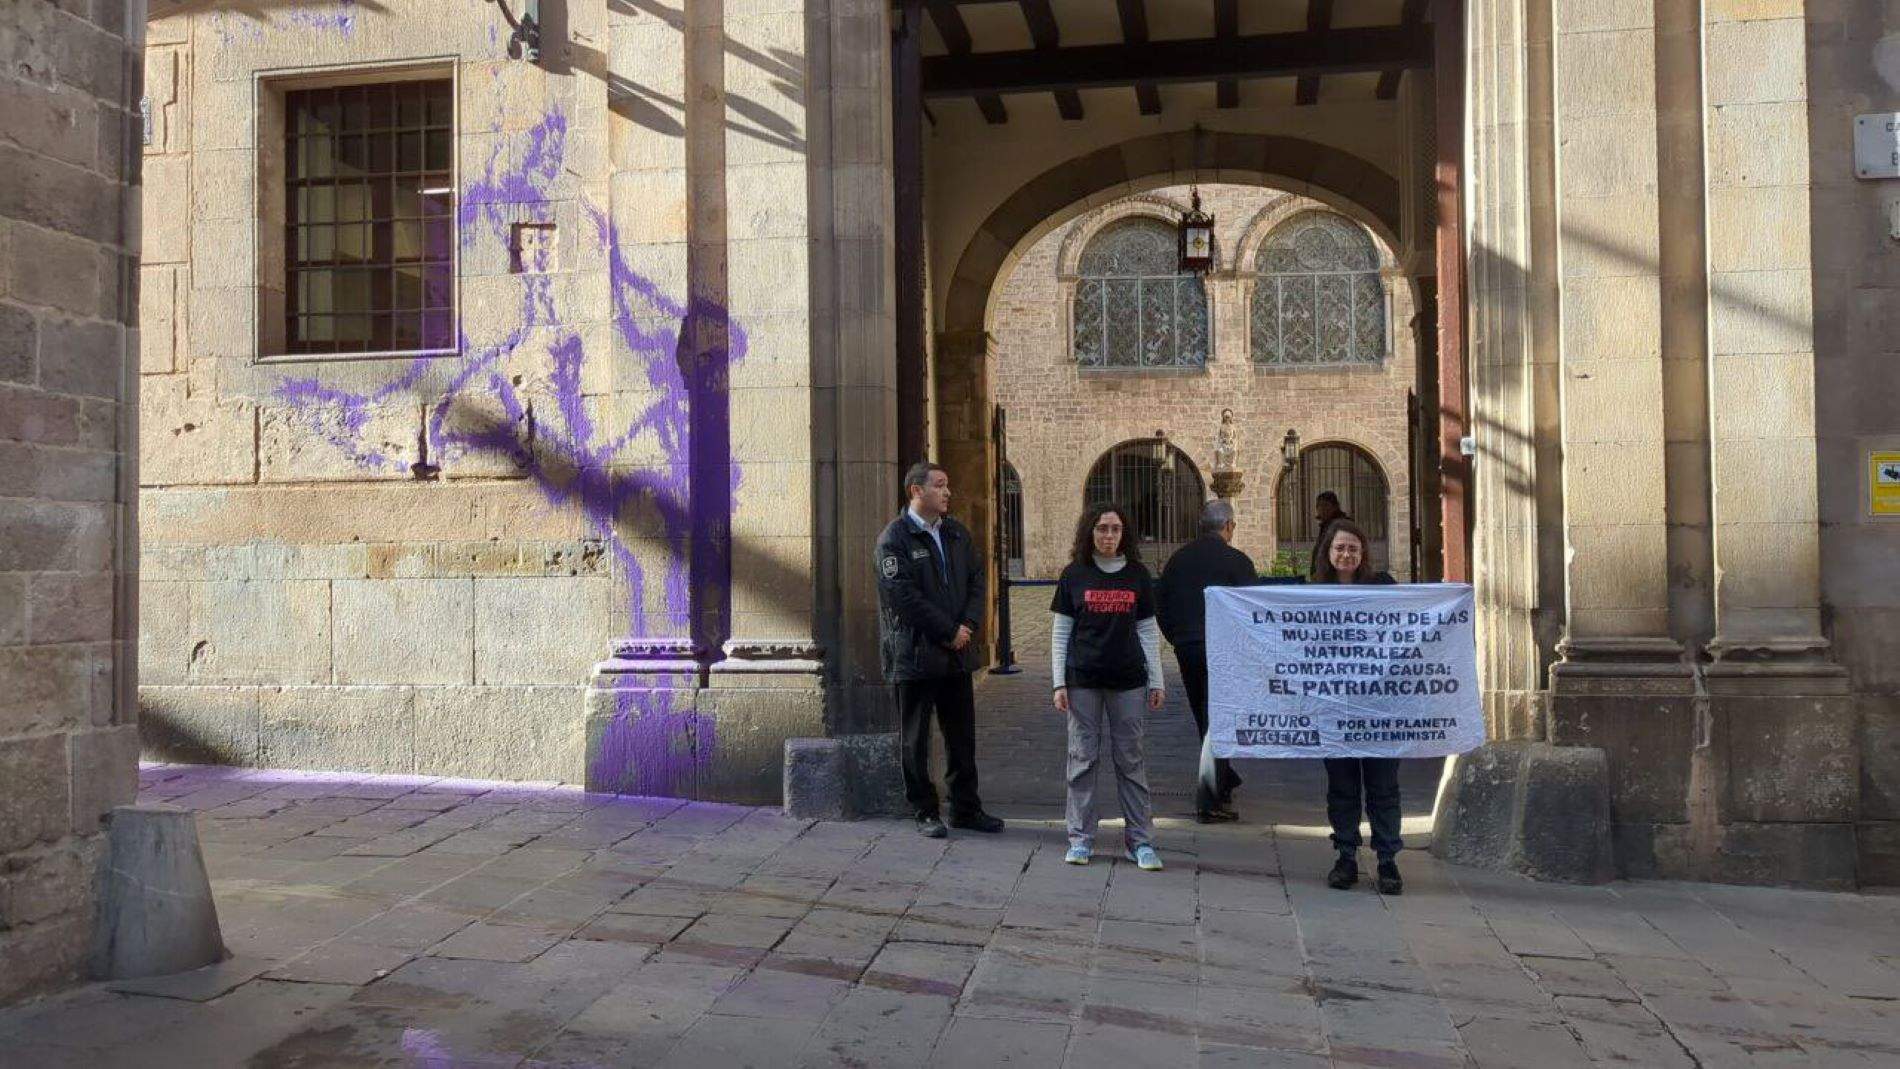 Activists hose purple paint on façade of Barcelona's Episcopal Palace in Women's Day protest | VIDEO